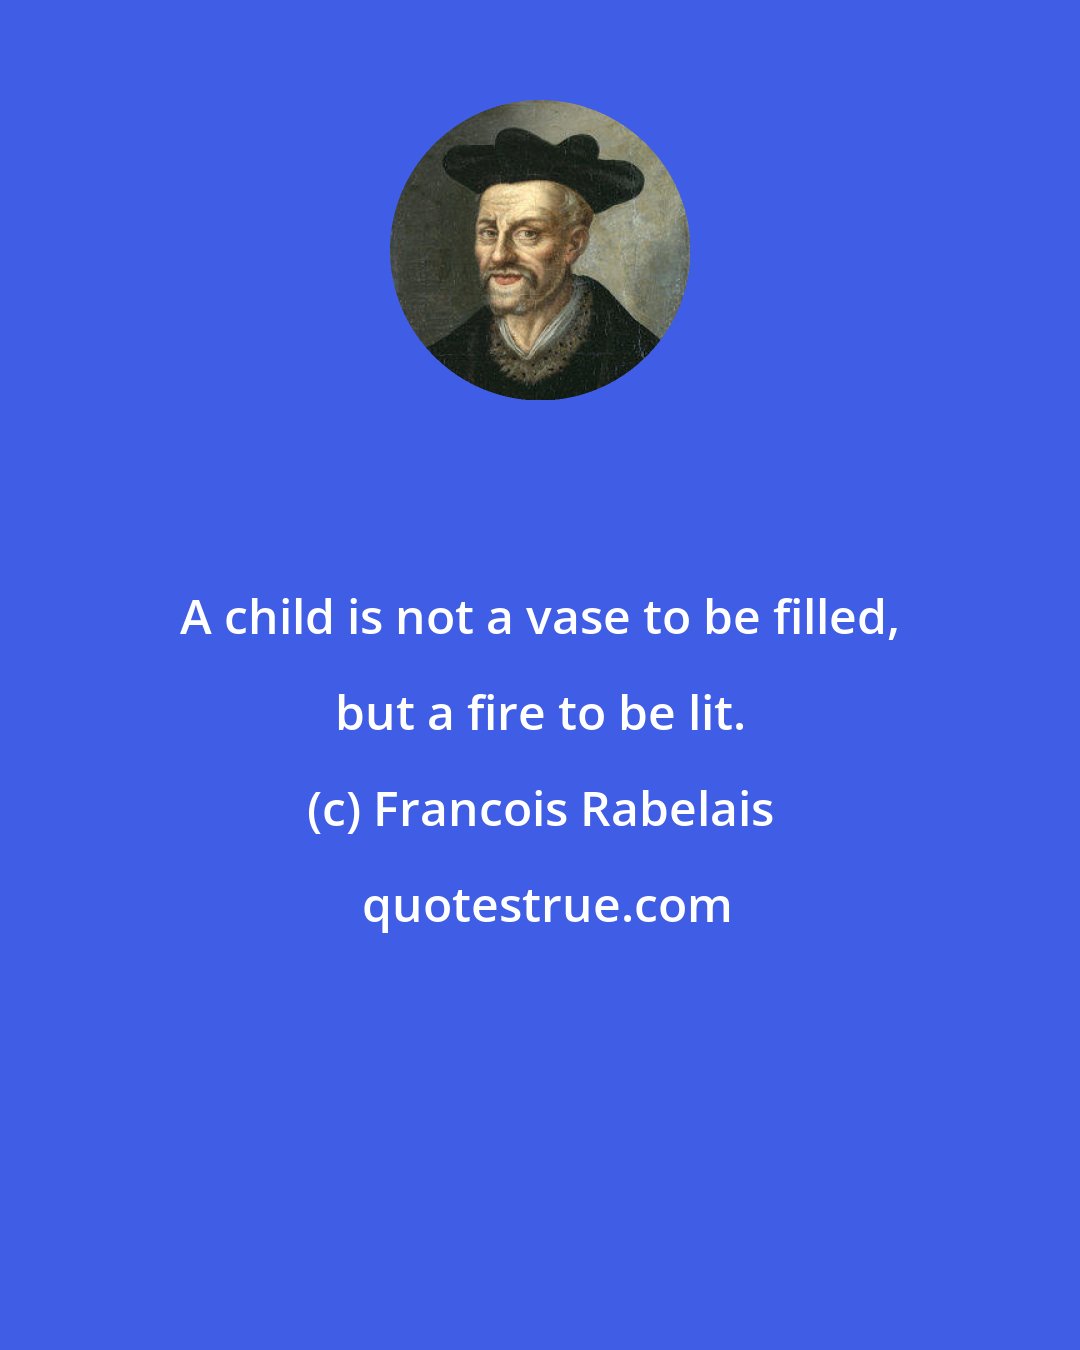 Francois Rabelais: A child is not a vase to be filled, but a fire to be lit.